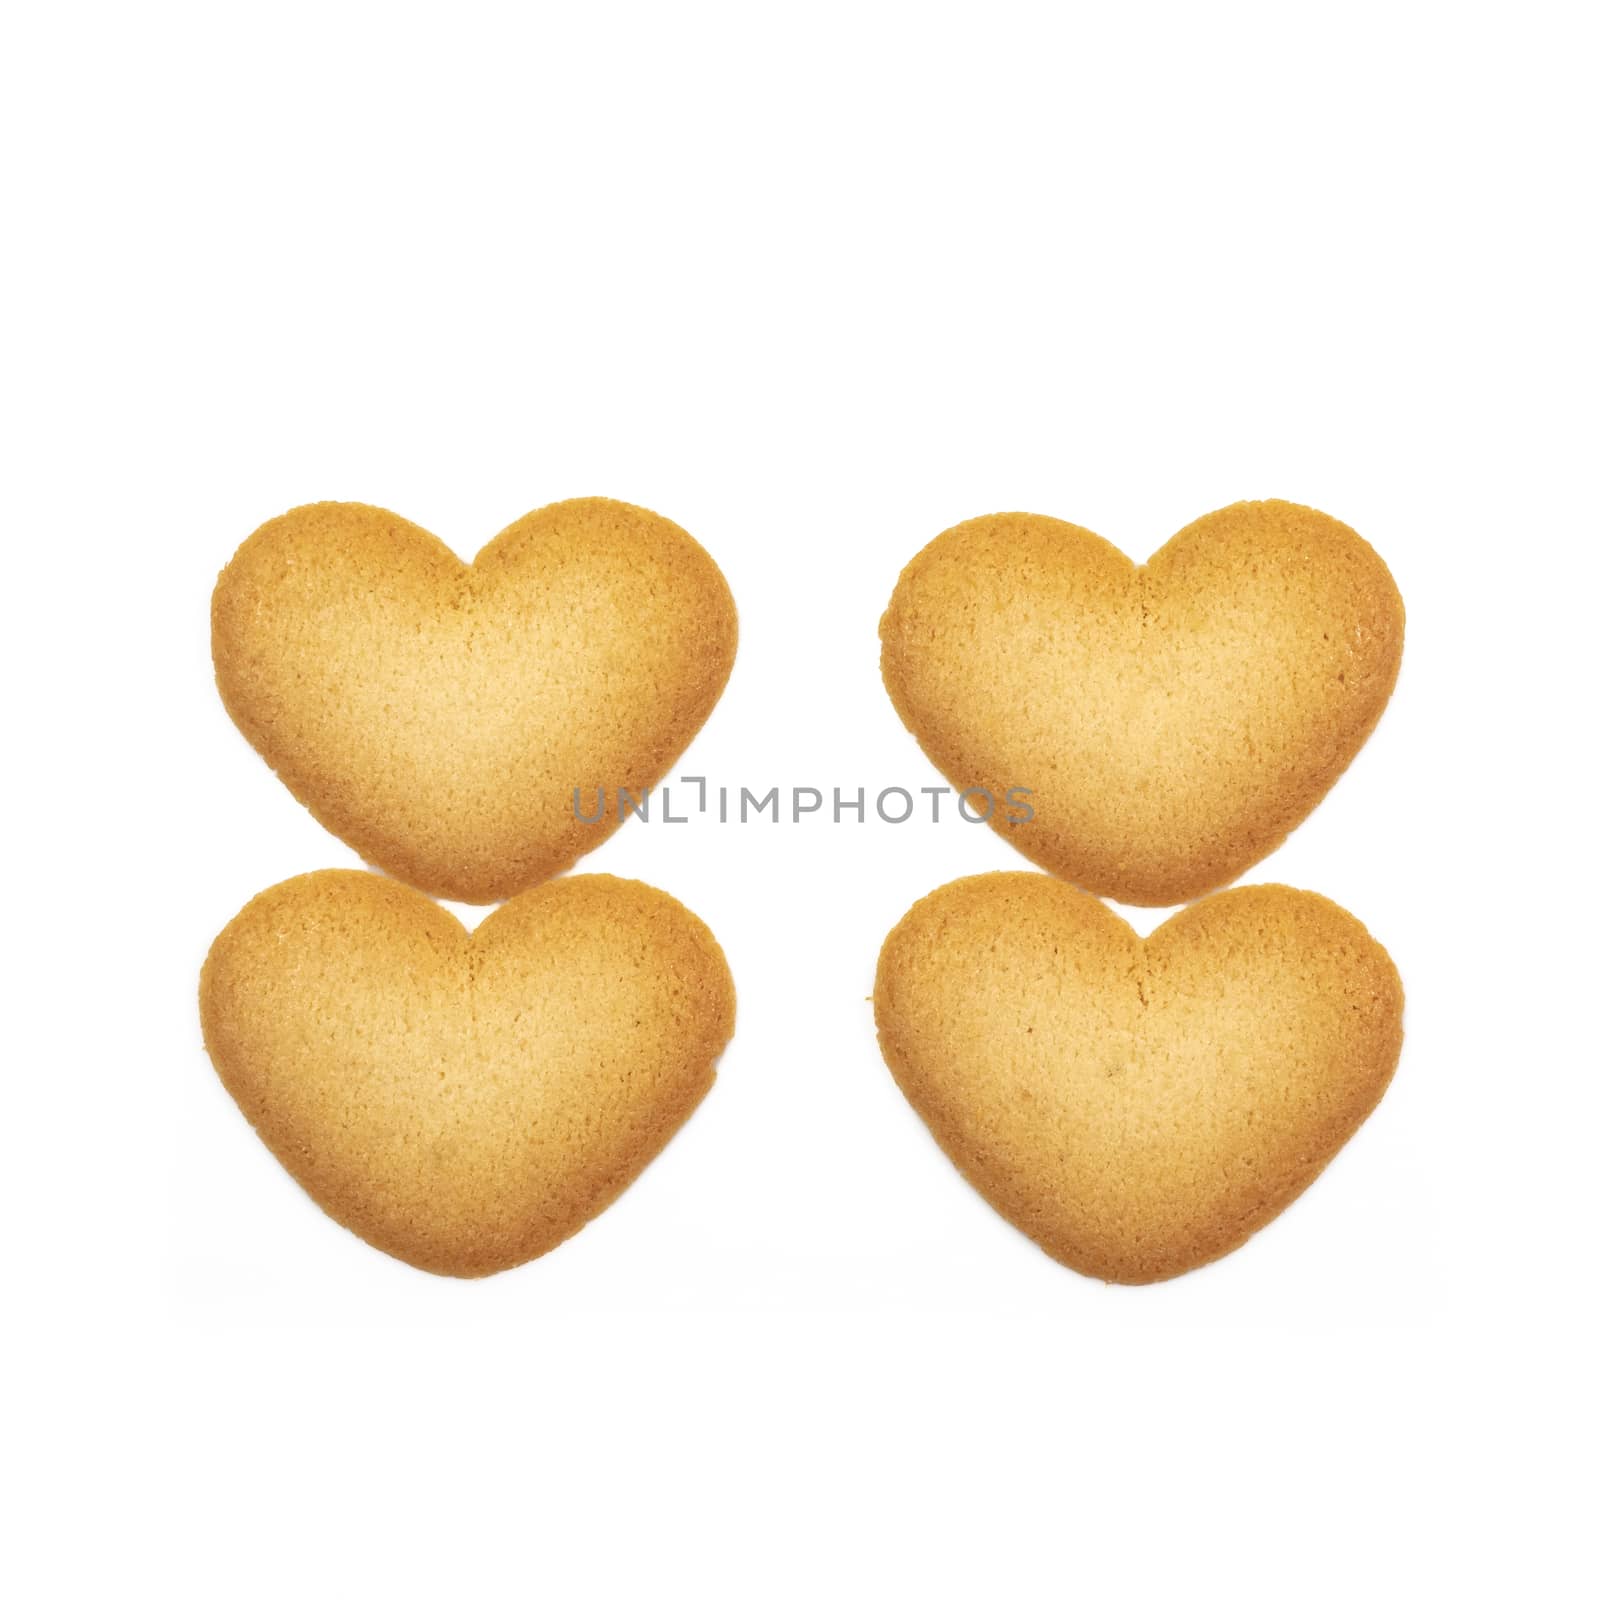 The close up of love heart shape cookie on white background for Valentine's day.